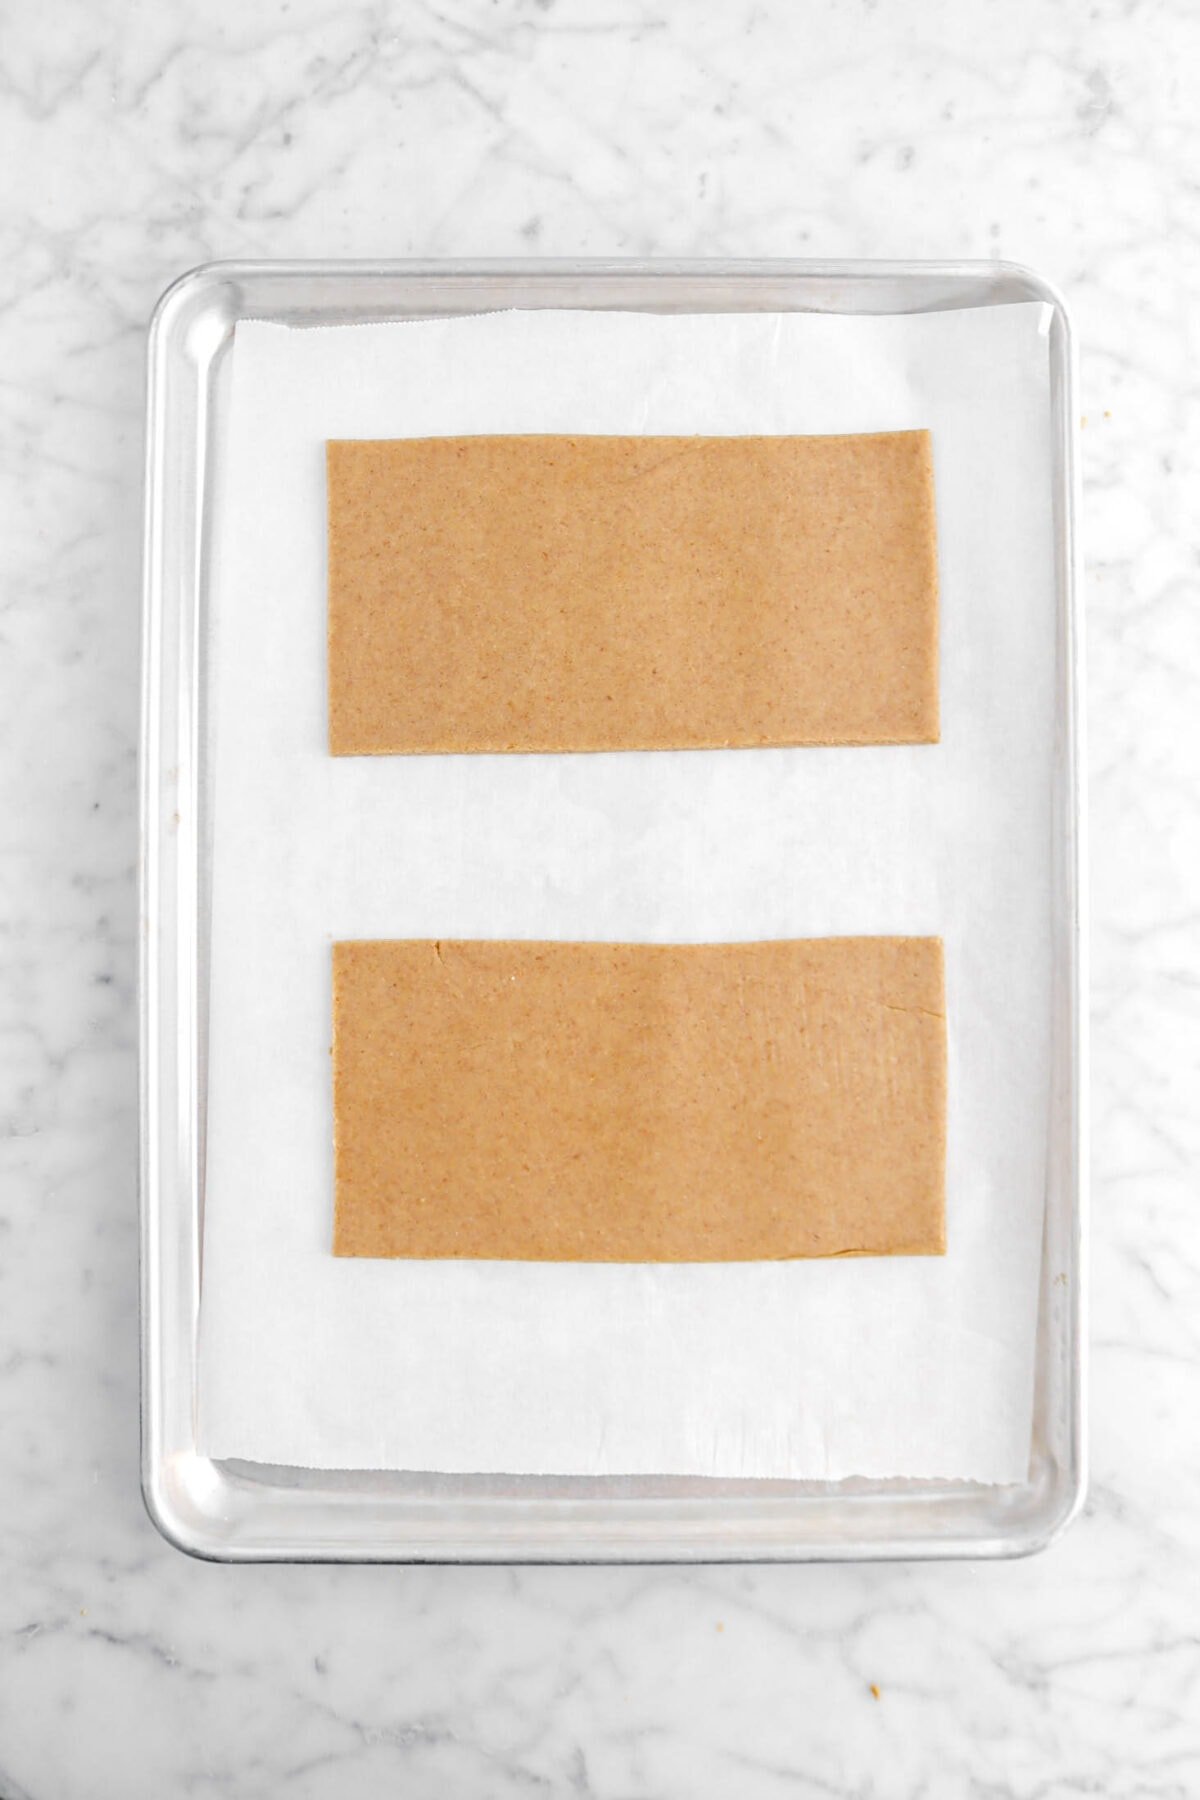 two large rectangles of dough on lined sheet pan